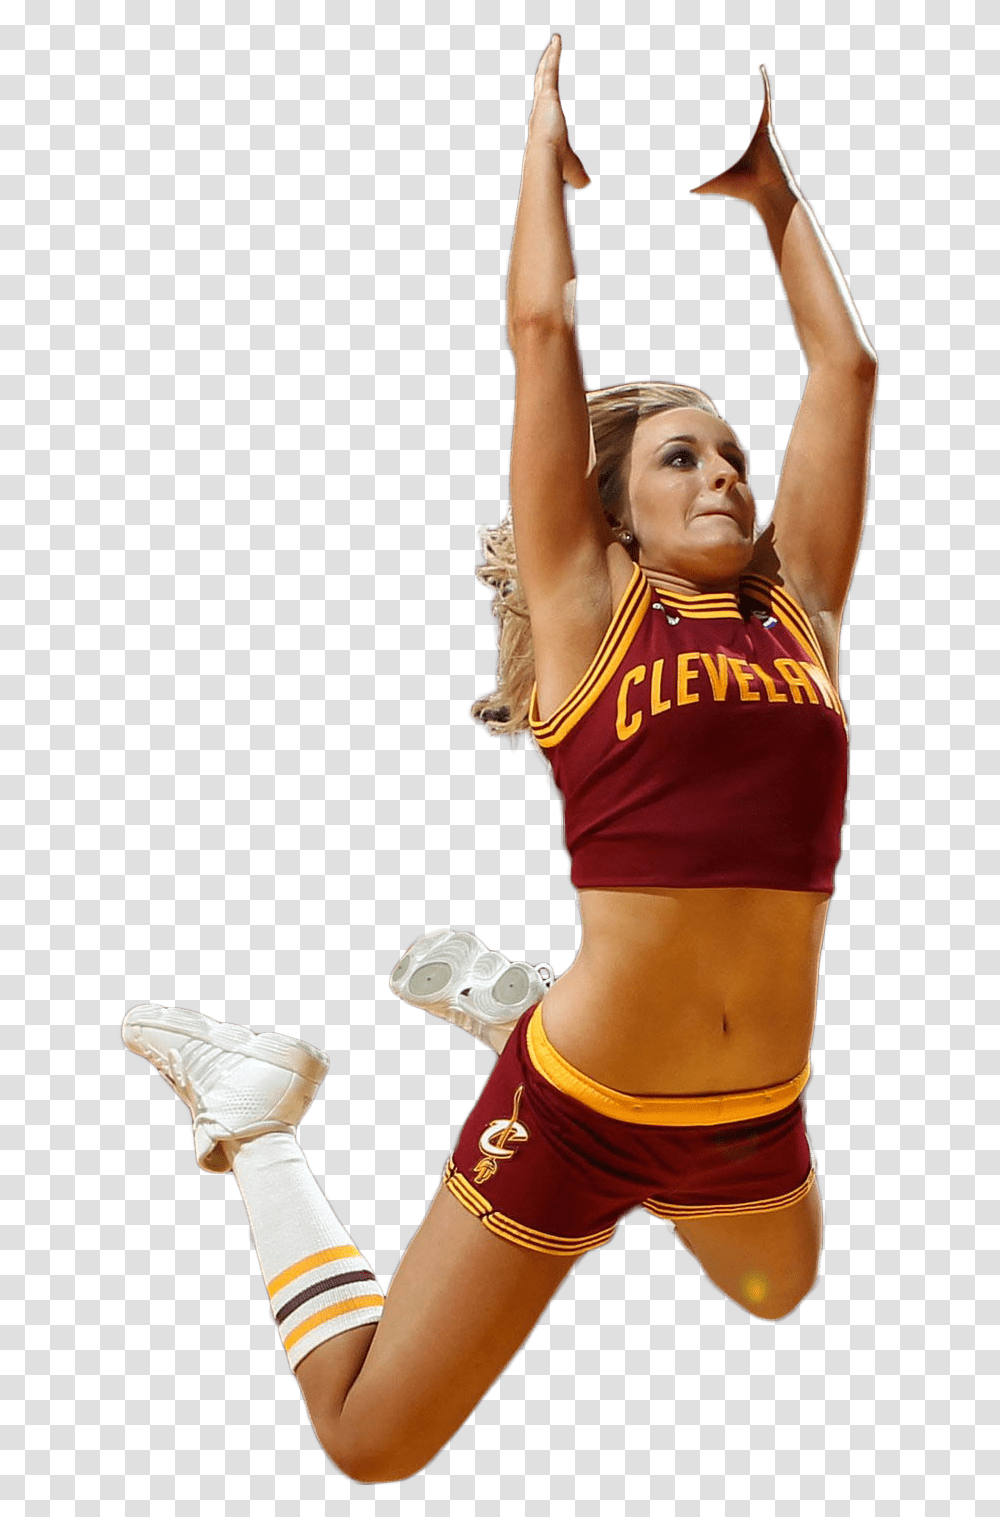 Cleveland Cheerleader Image For Free Cheerleader, Person, Human, People, Clothing Transparent Png